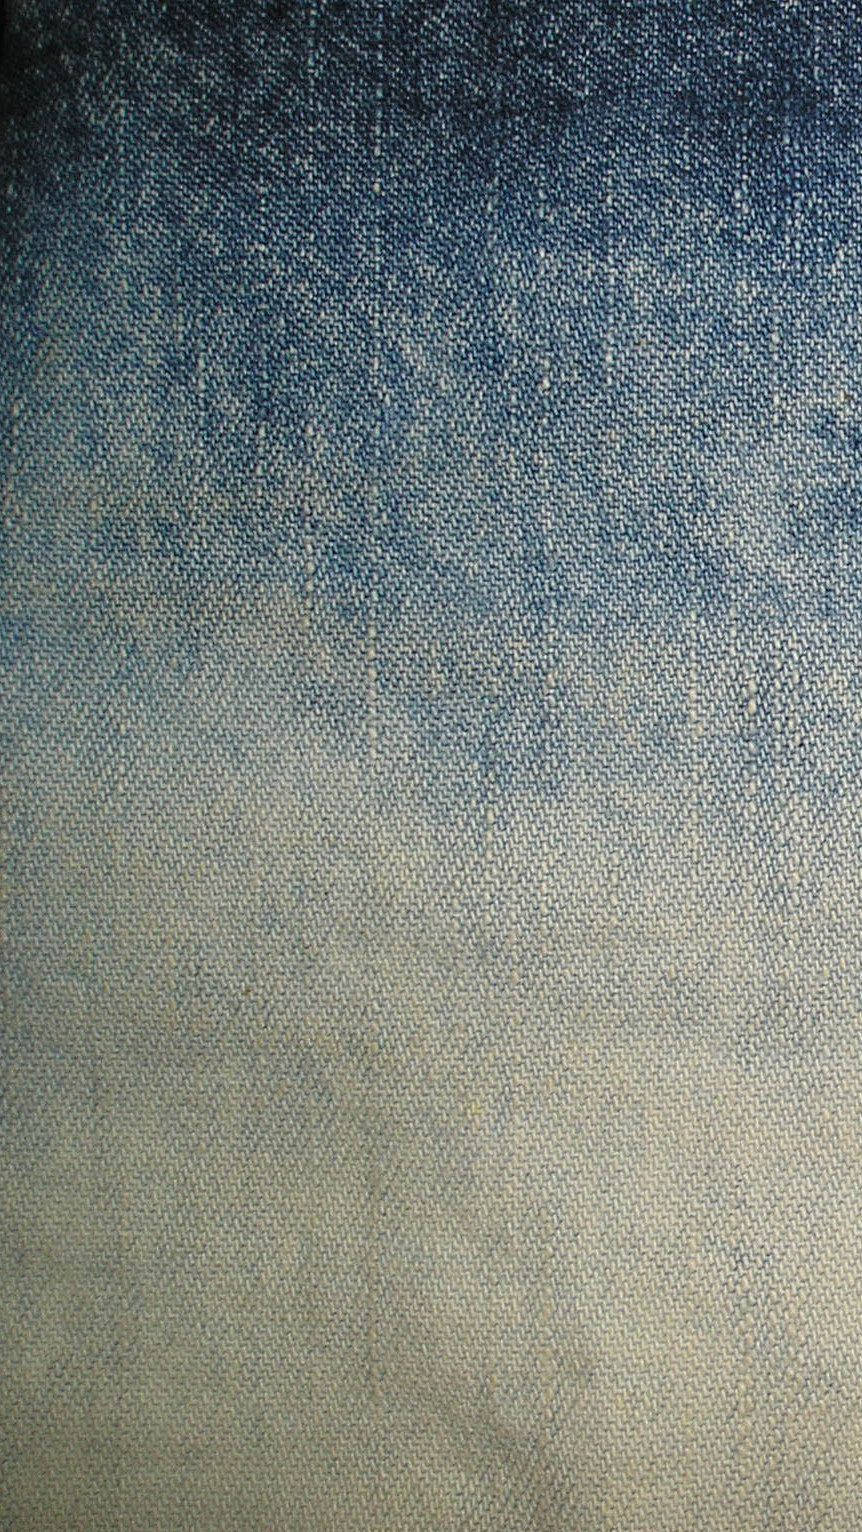 Denim Texture With Faded Area Background